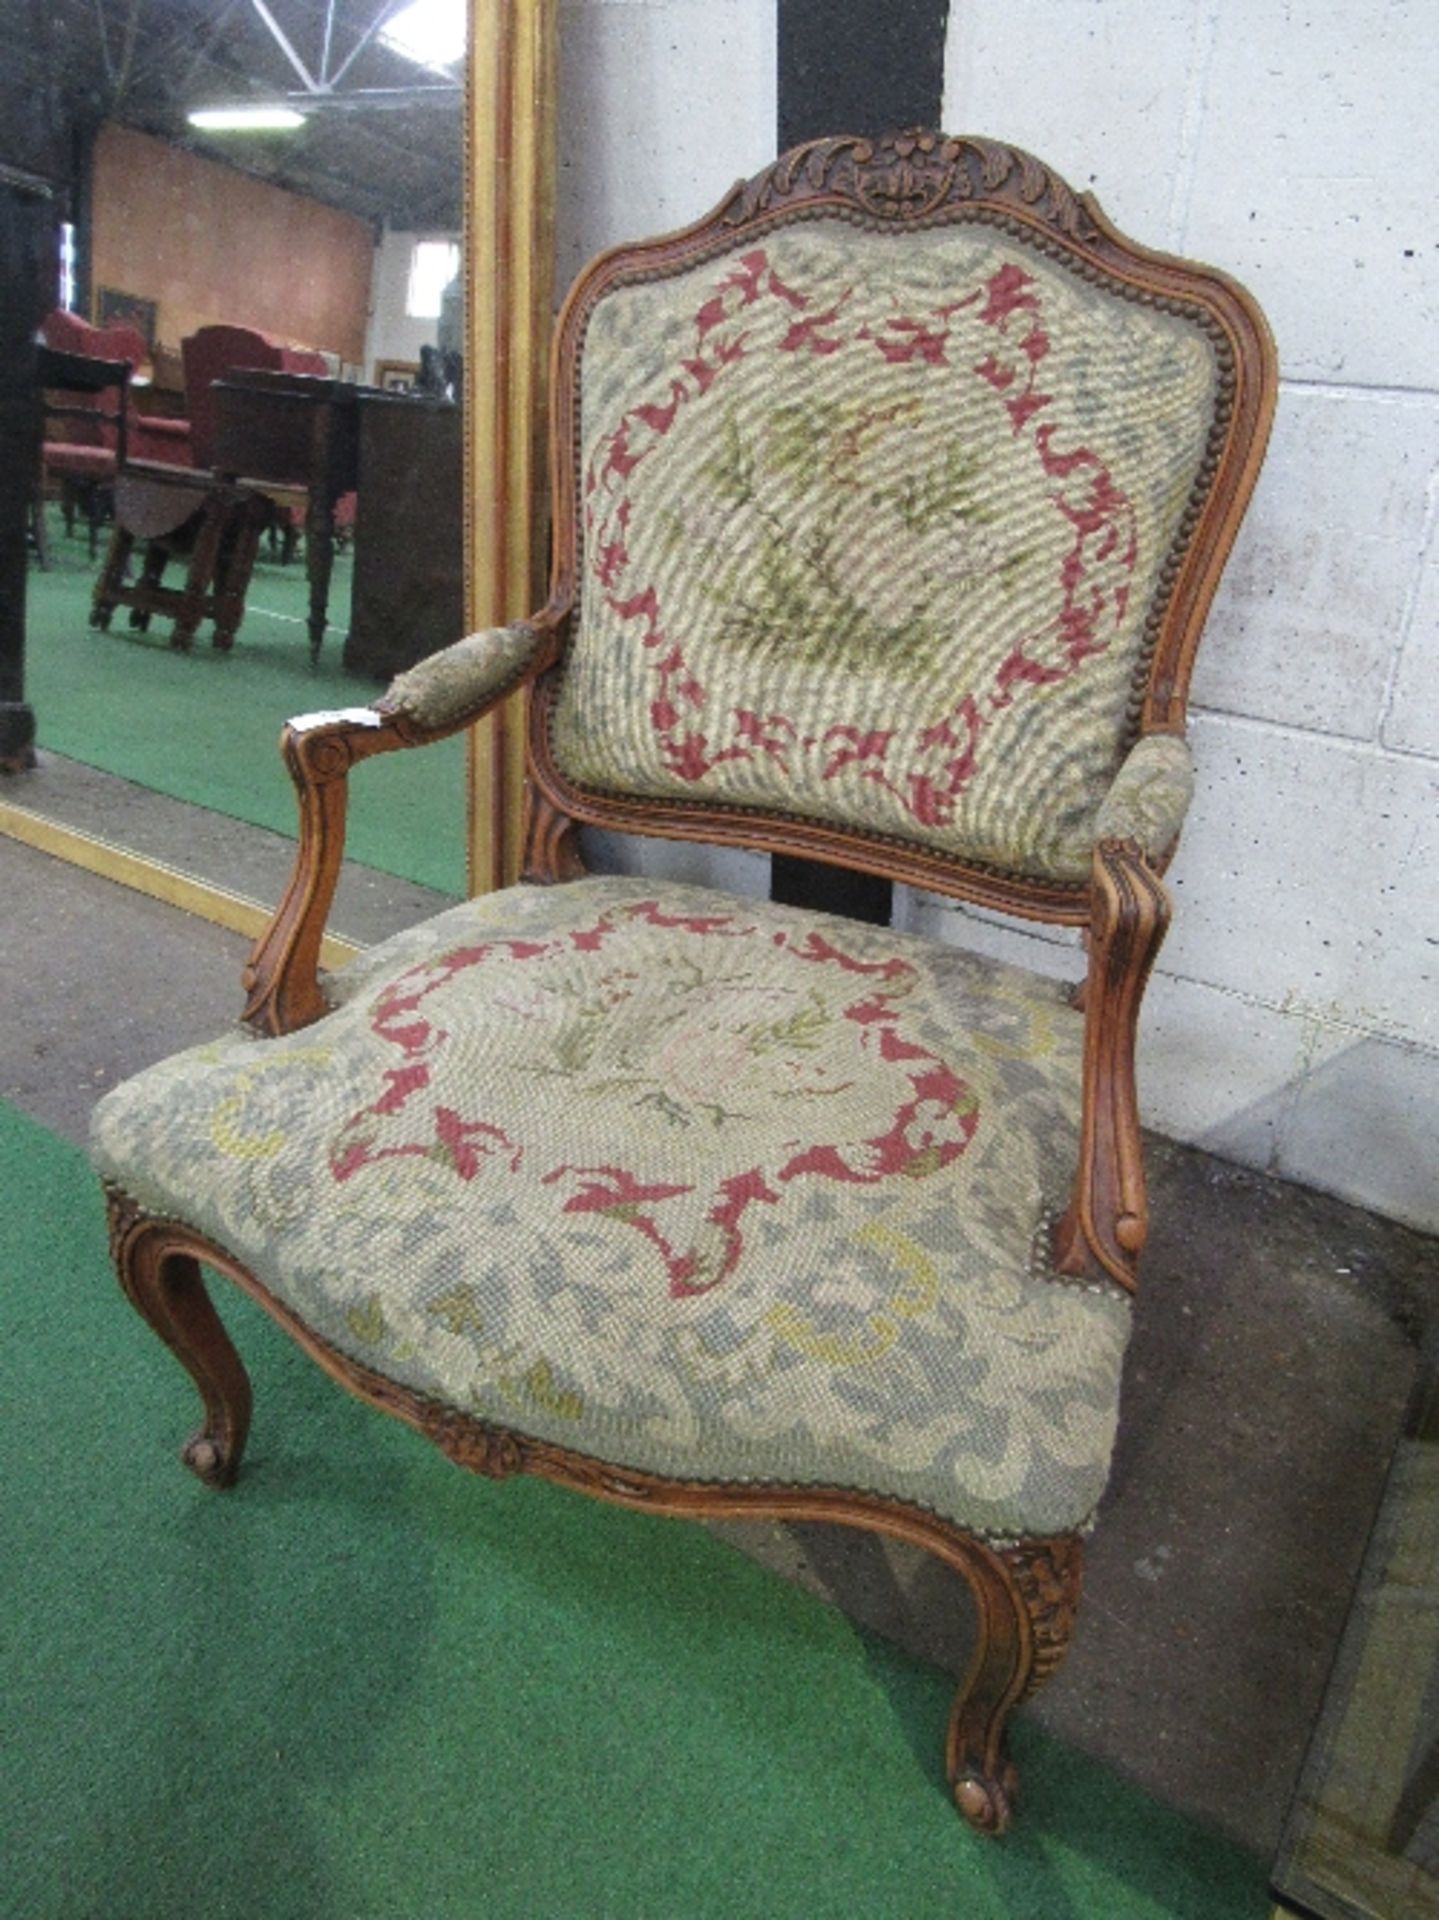 Large French cherry wood Fauteuil armchair with woven patterned fabric (shows signs of being - Image 2 of 2